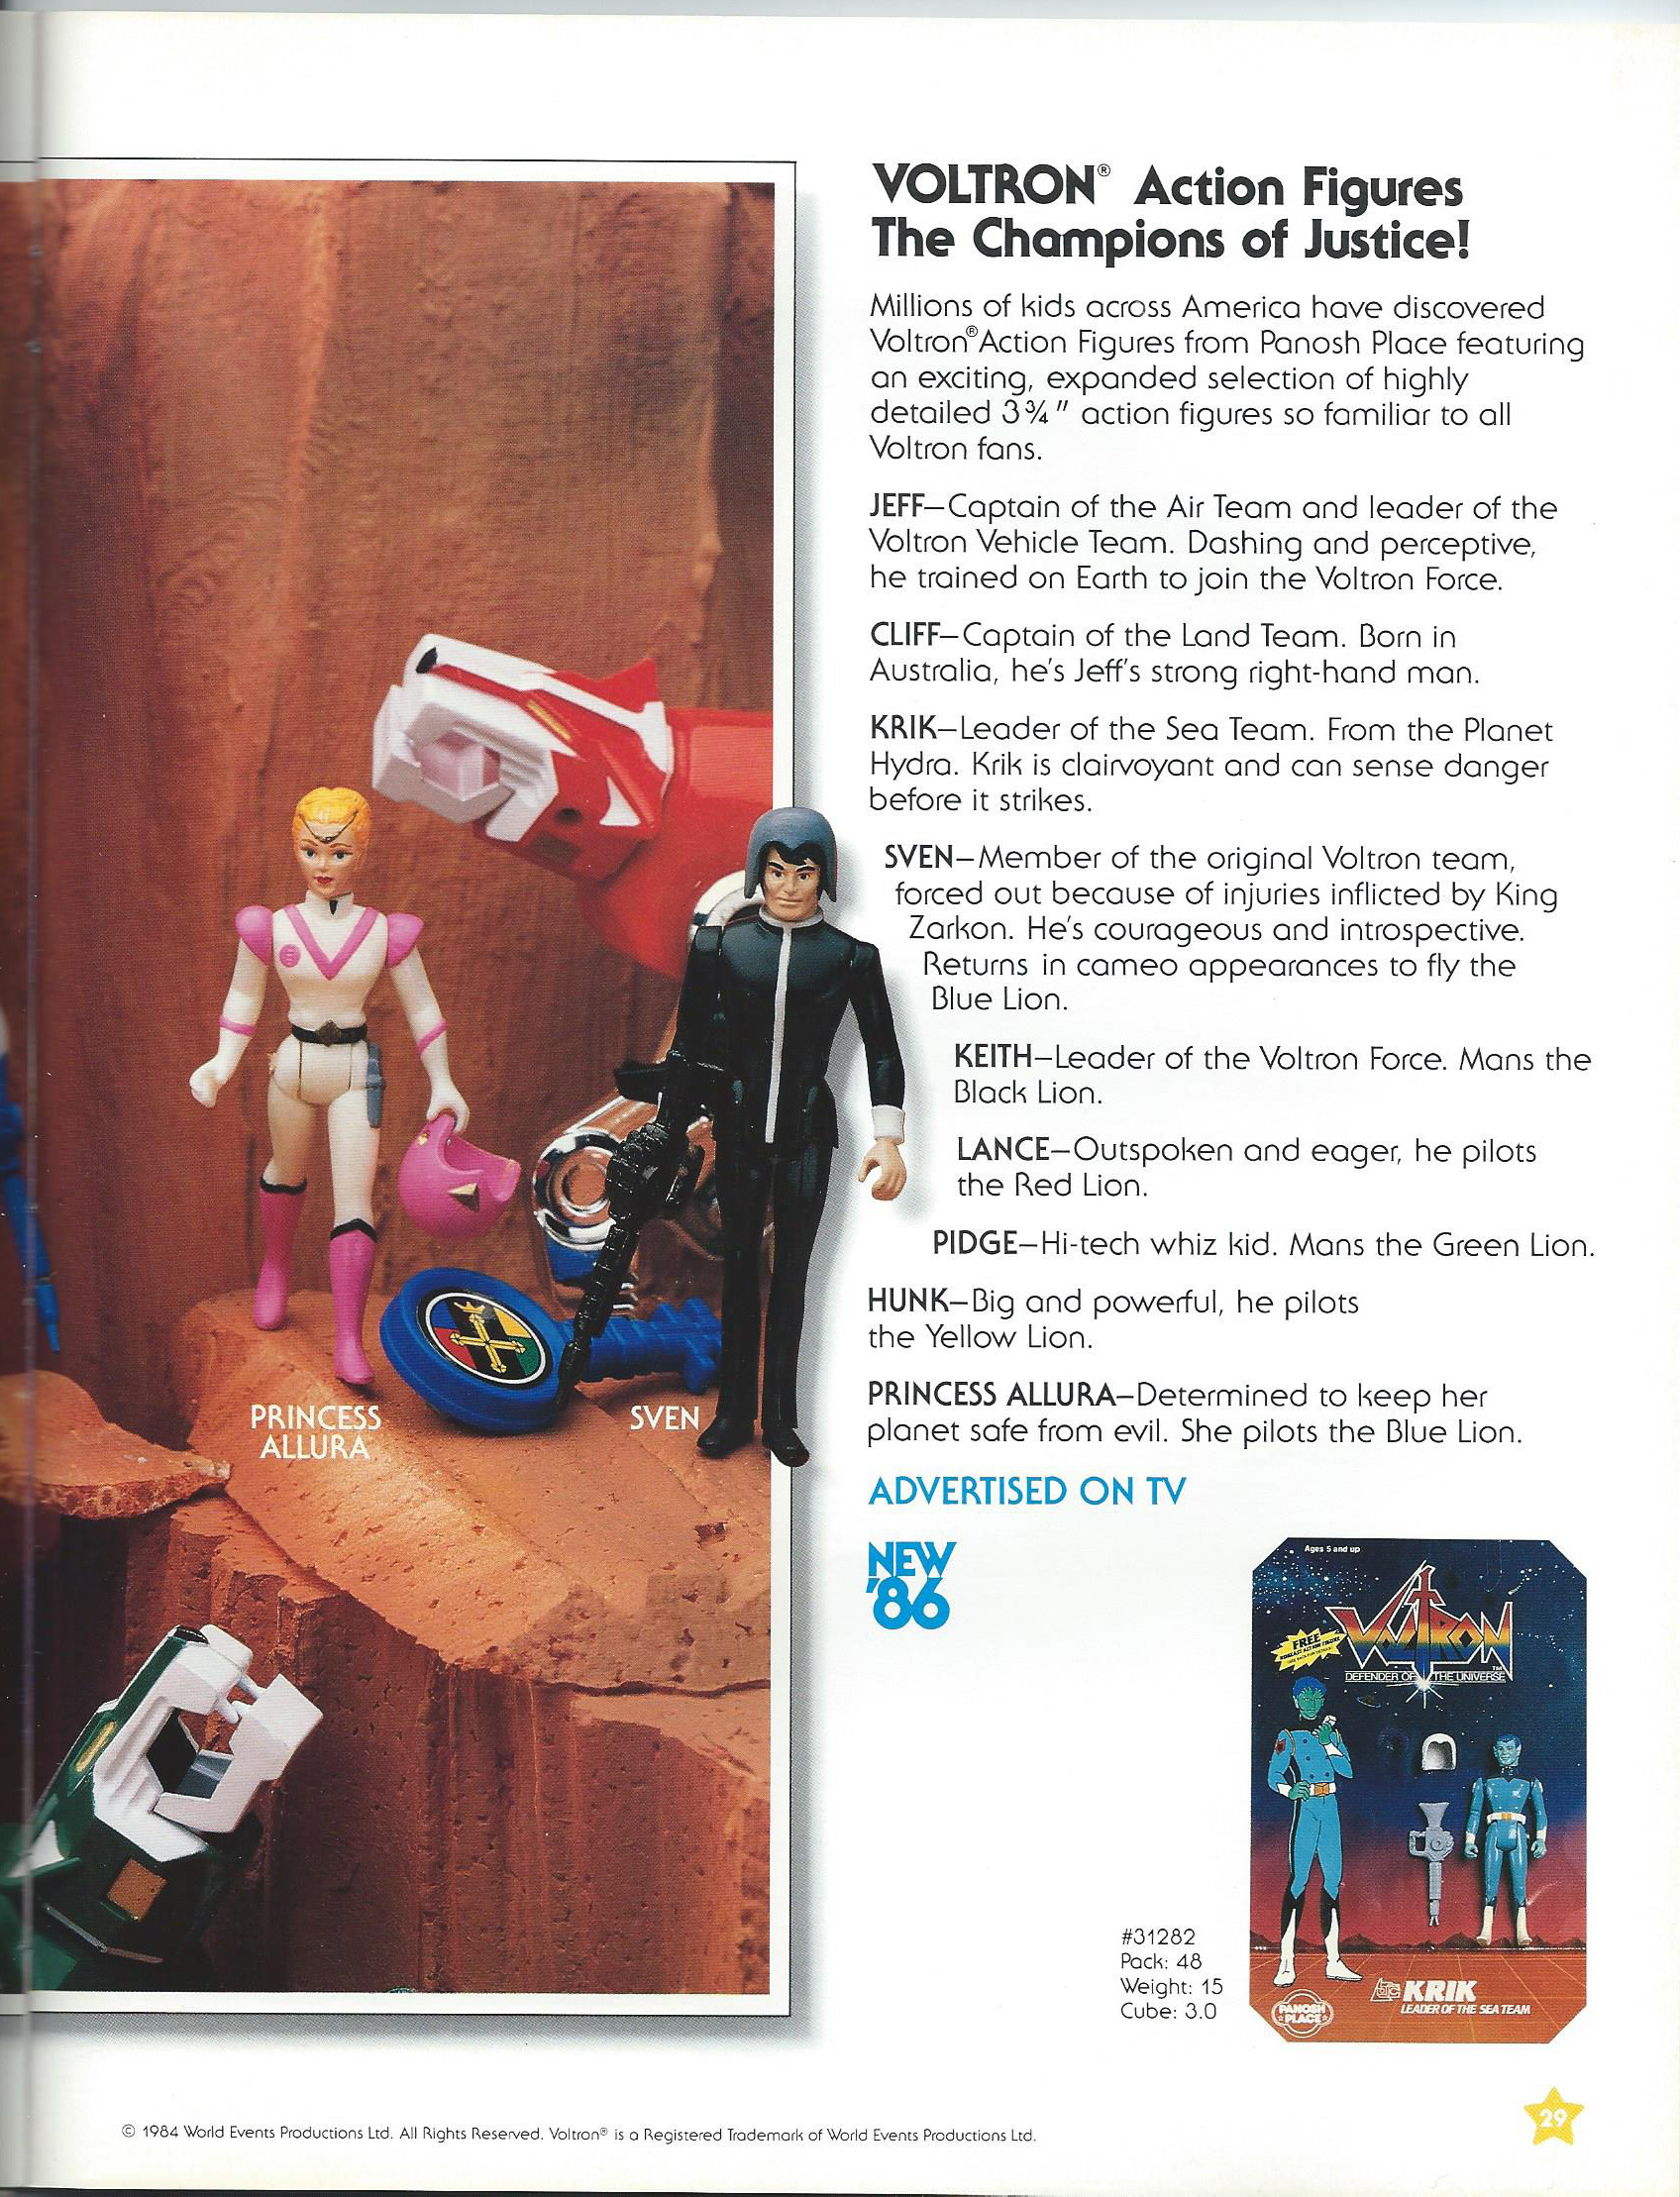 Panosh Place 1986 Toy Fair Catalog - Page 29 (Voltron Champions of Justice action figures)